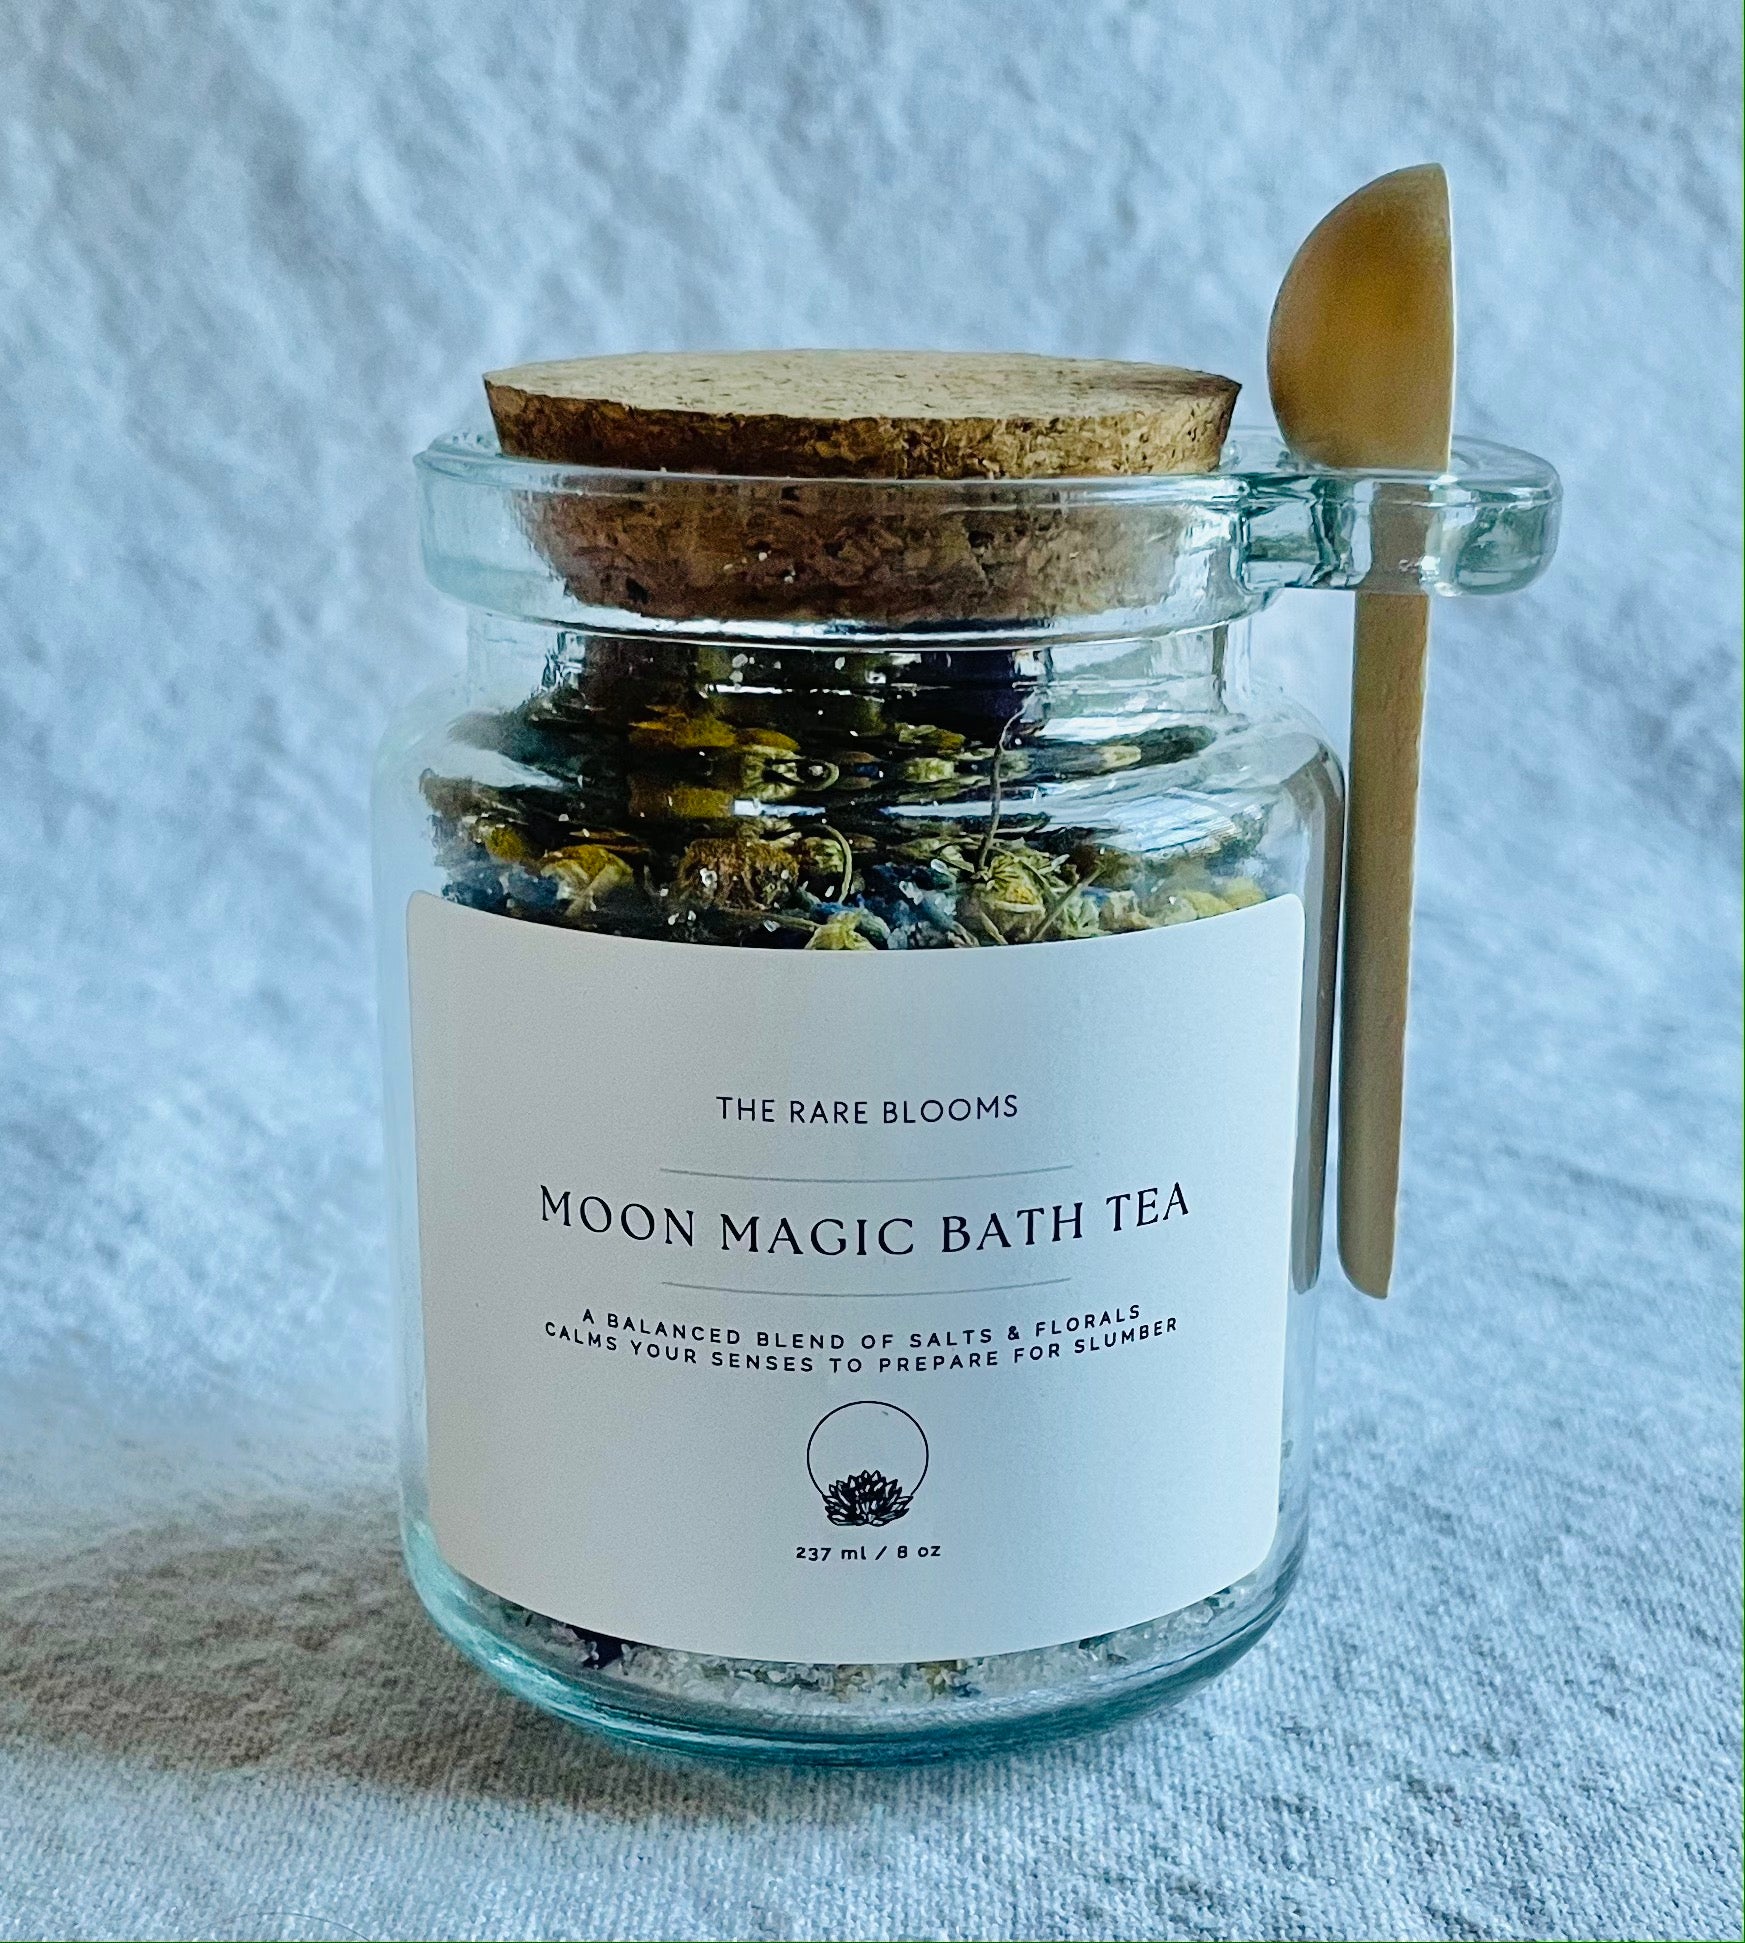 Moon Magic Bath Tea for your bath time ritual self care. A balanced blend of salts and florals to calm the senses and prepare the mind for slumber. 8oz glass jar with scoop